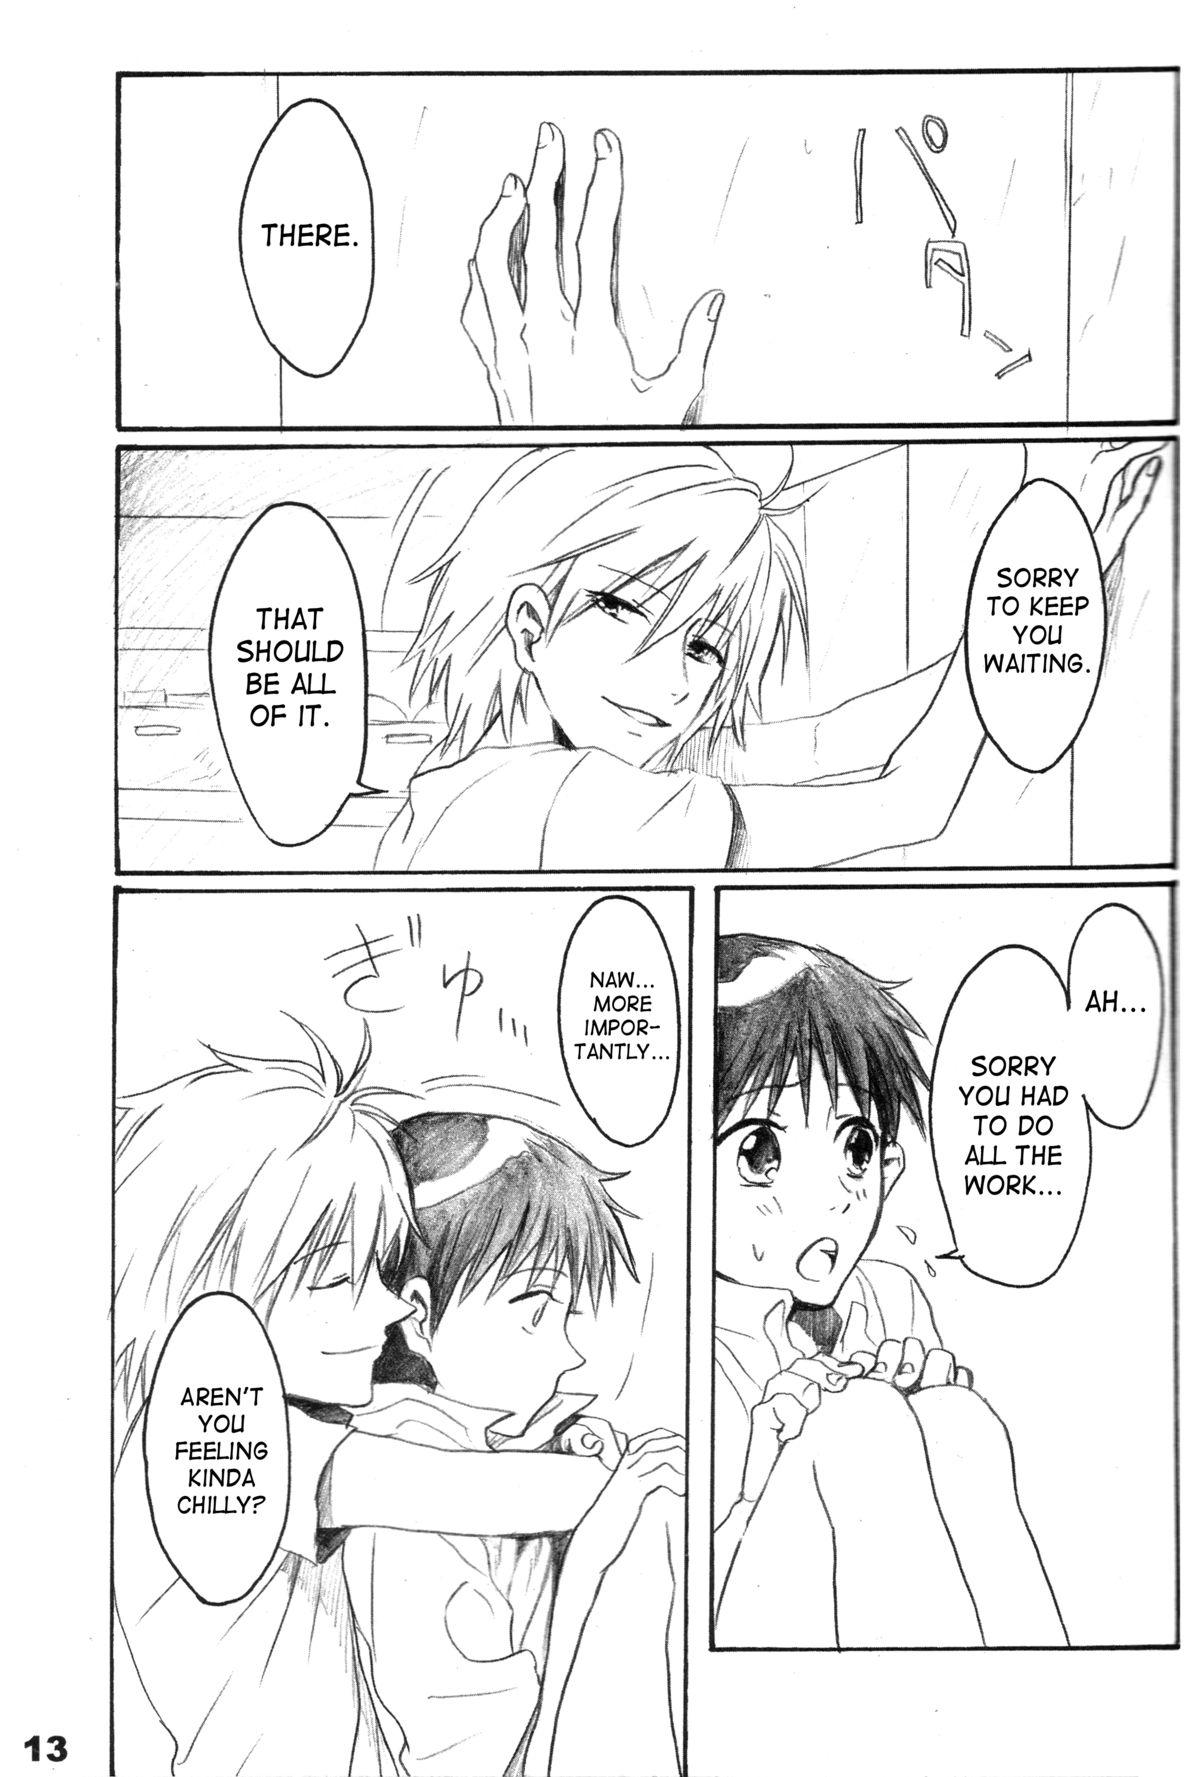 Cameltoe Urunda Me de Emono wo Miru na | Dont Look At Your Prey With Bleary Eyes - Neon genesis evangelion Free Fuck - Page 12